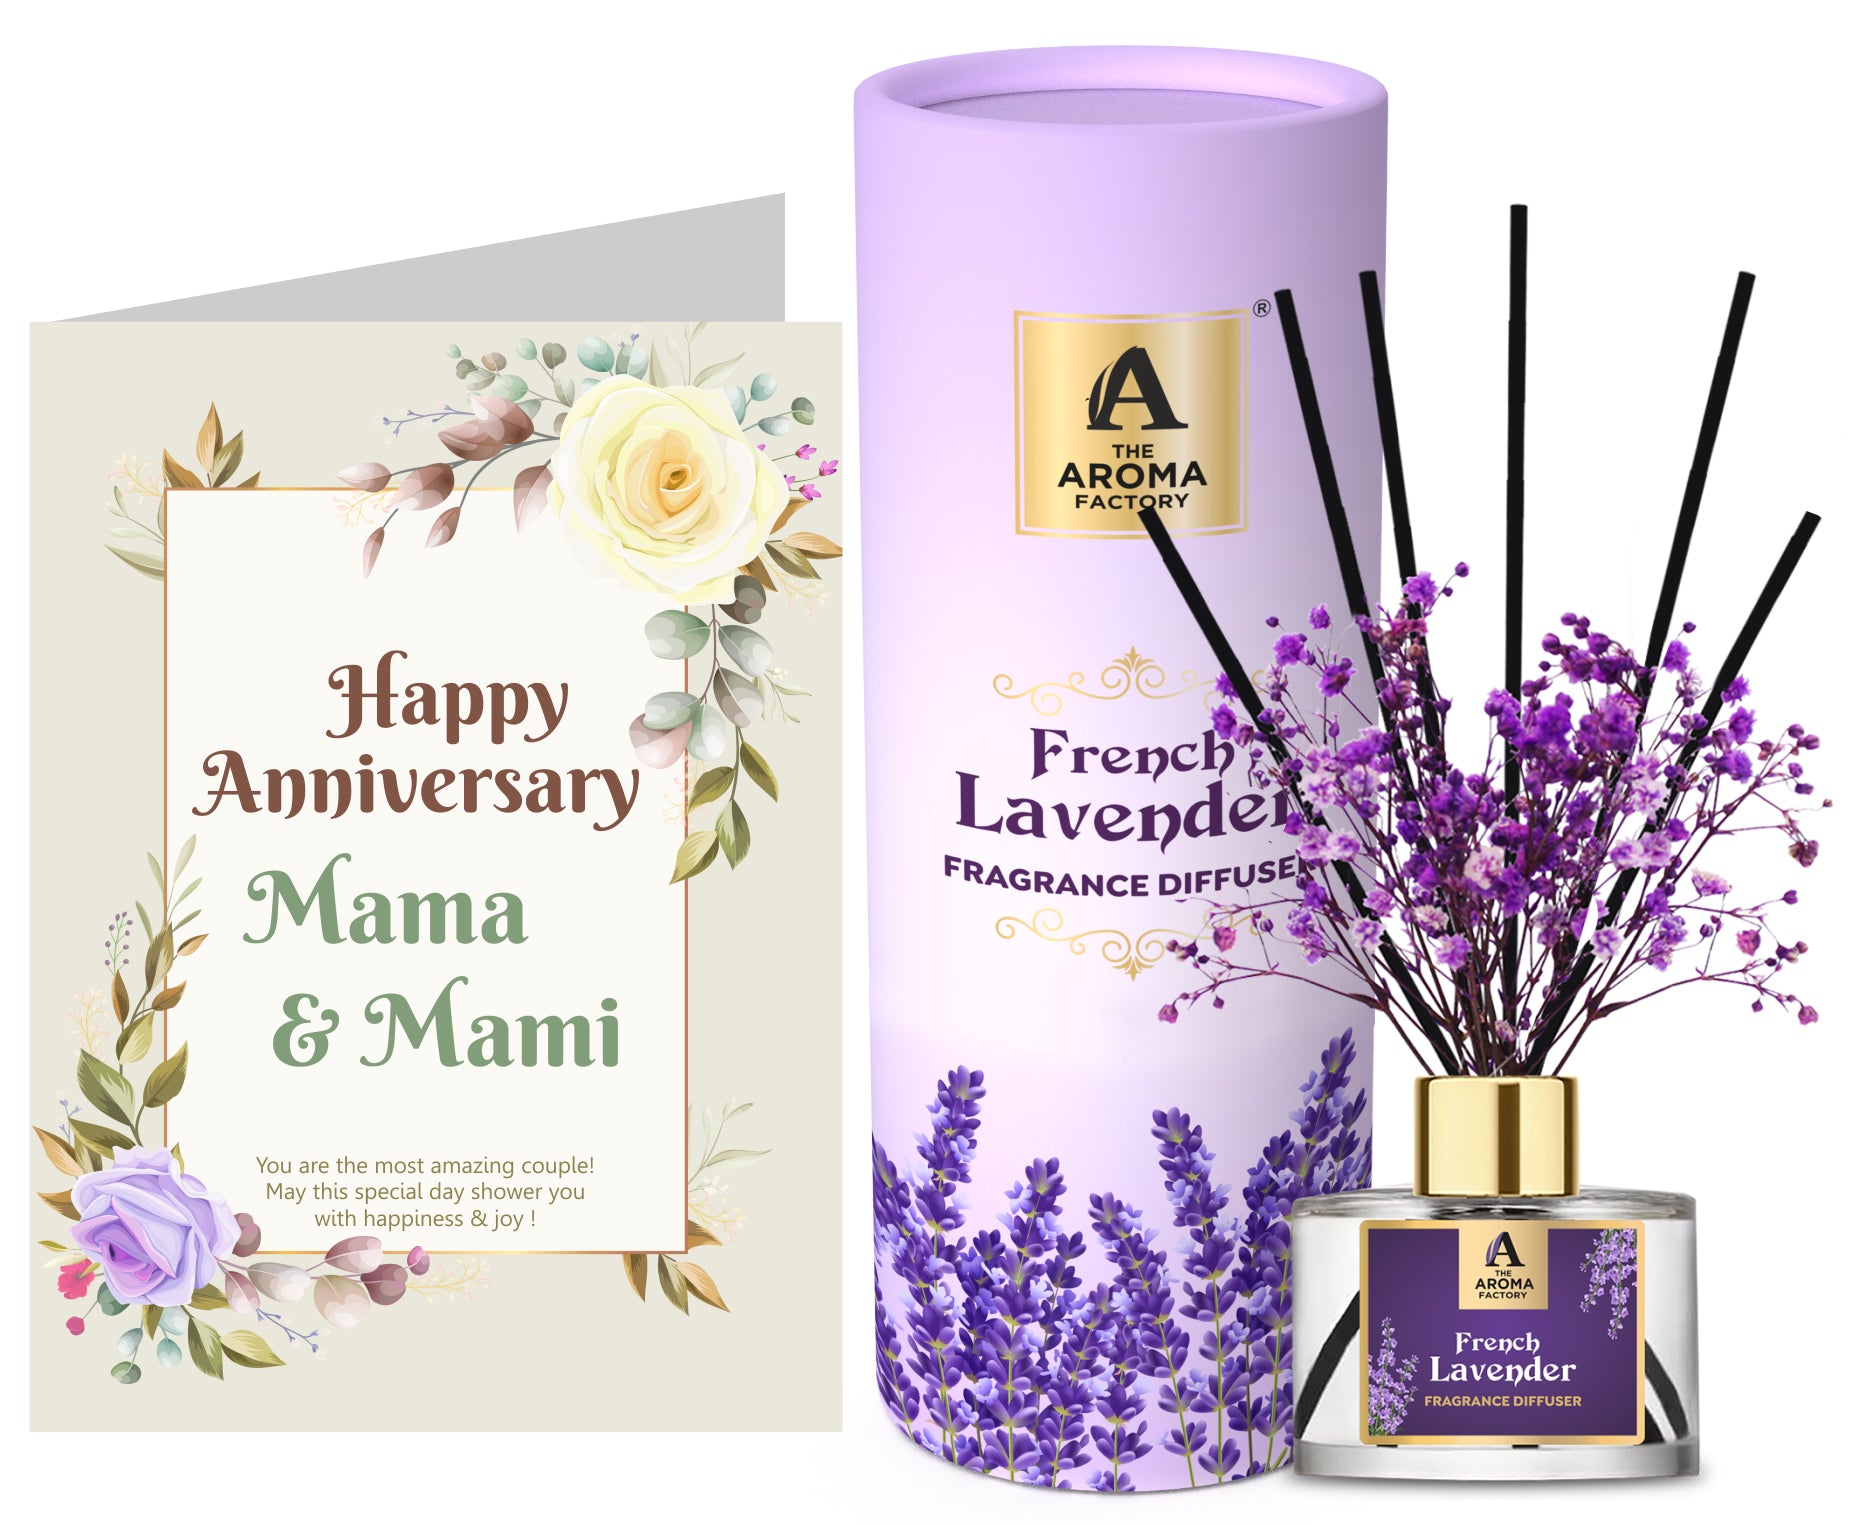 The Aroma Factory Happy Anniversary Mama & Mami Gift with Card, French Lavender Fragrance Reed Diffuser Set (1 Box + 1 Card)